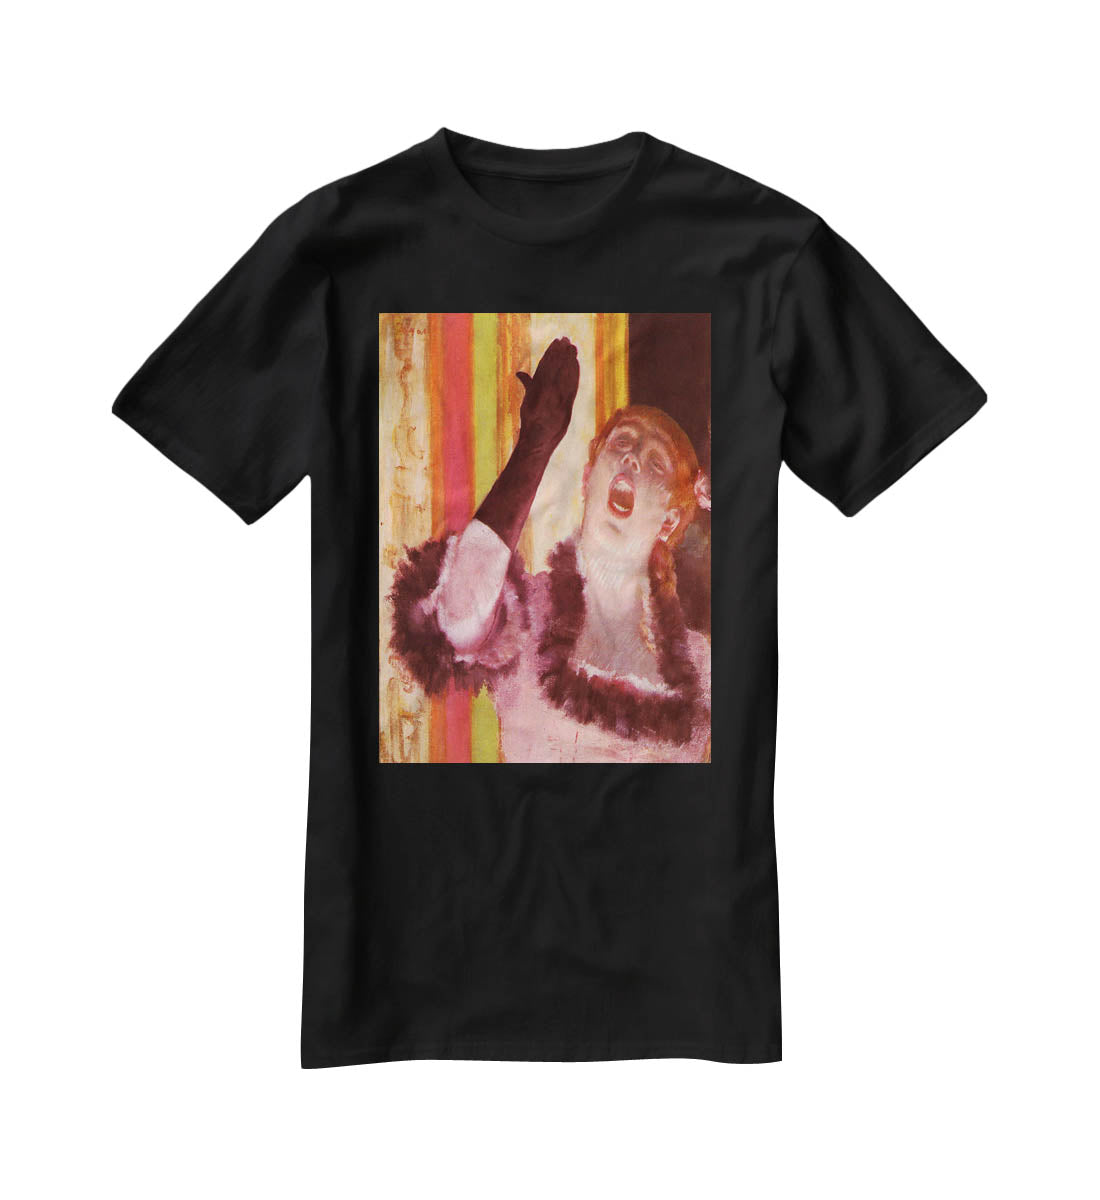 The singer with the glove by Degas T-Shirt - Canvas Art Rocks - 1